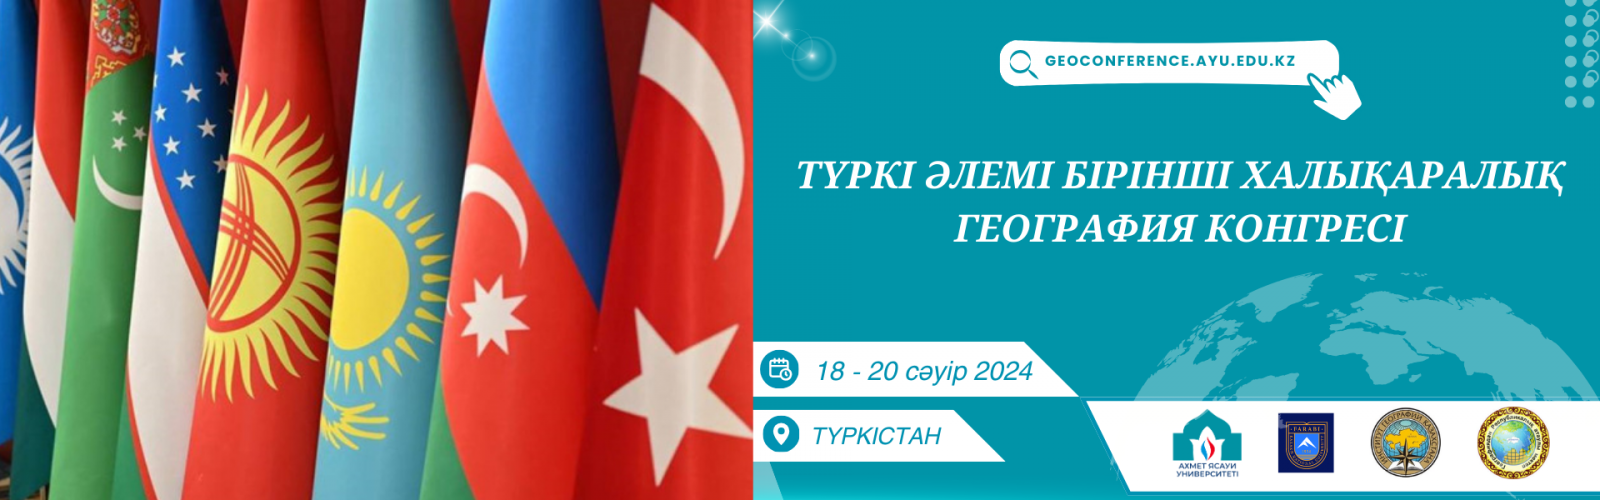 THE FIRST INTERNATIONAL CONGRESS OF GEOGRAPHERS OF THE TURKIC WORLD